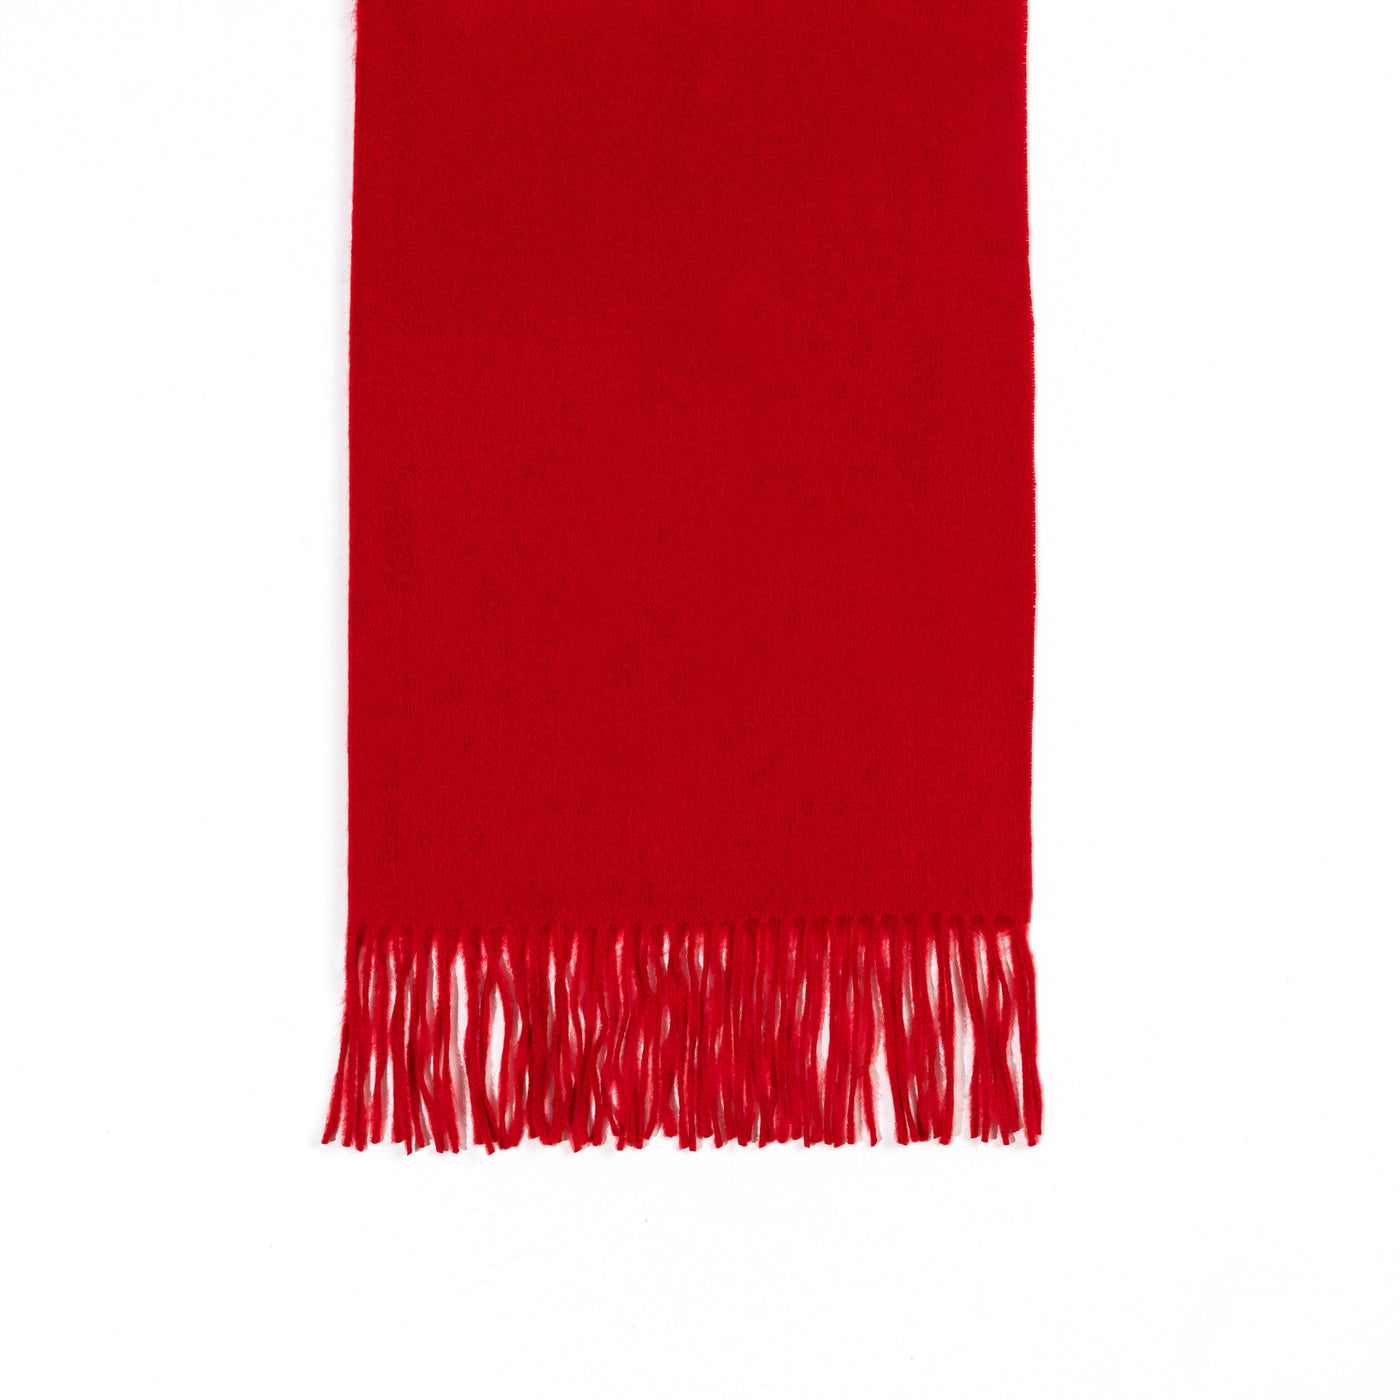 Scarf Plain Red 100% Pure Lambswool